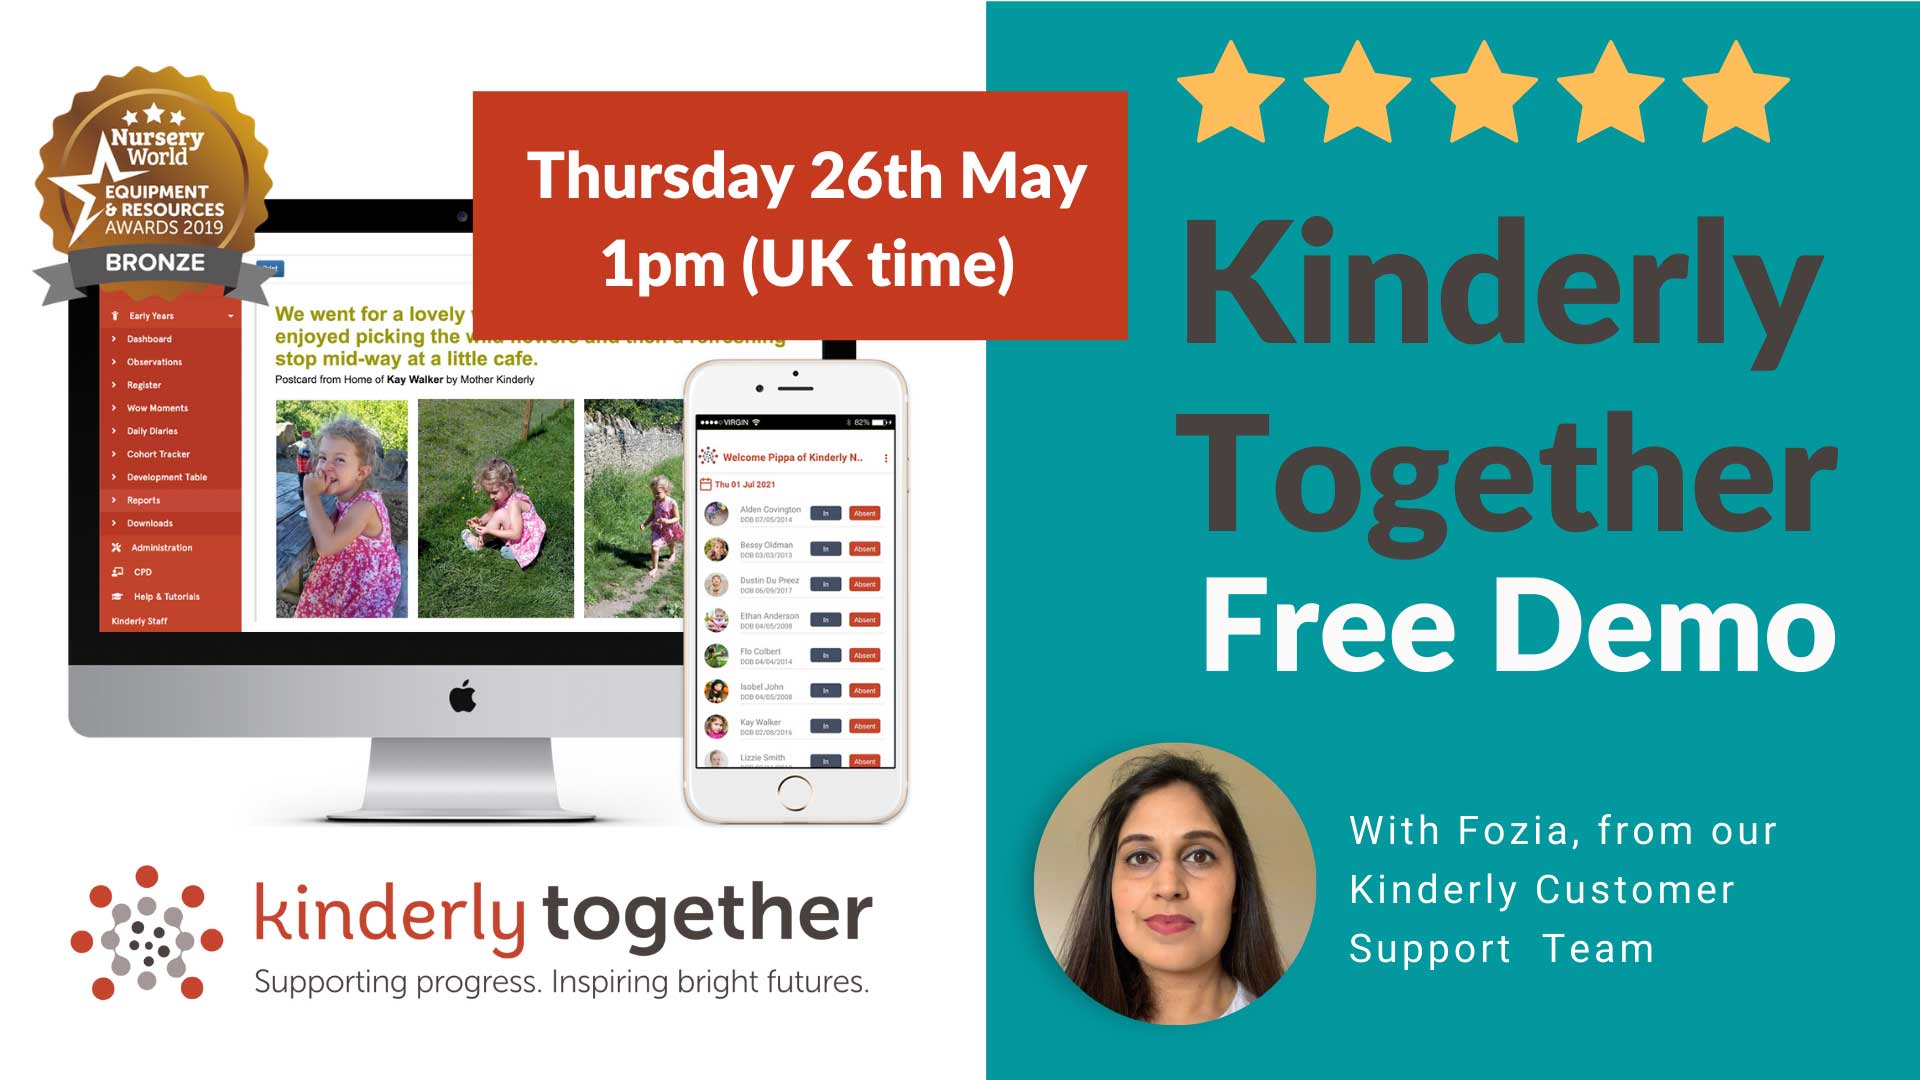 kinderly together software demo advert for thursday 26th may 2022 lunchtime session